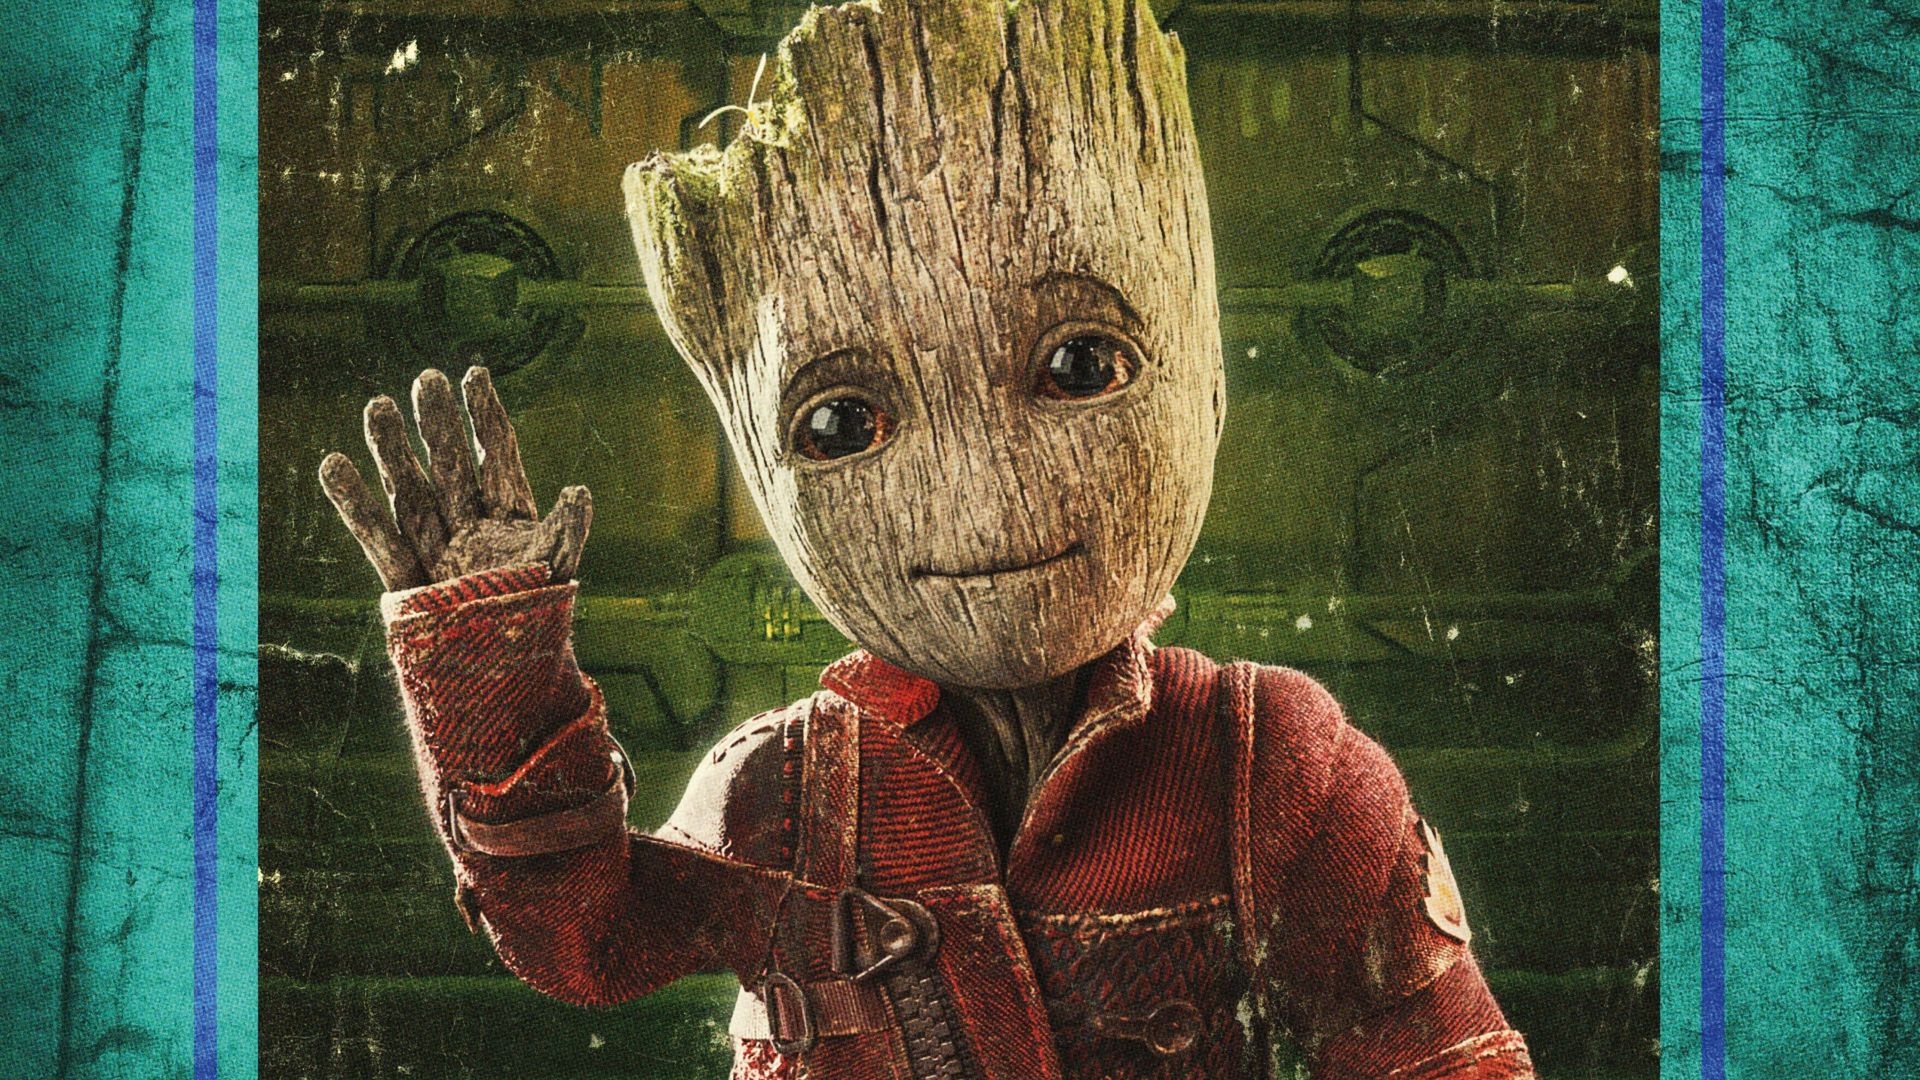 Baby Groot, Guardians of the Galaxy, Movie wallpaper, High definition, 1920x1080 Full HD Desktop